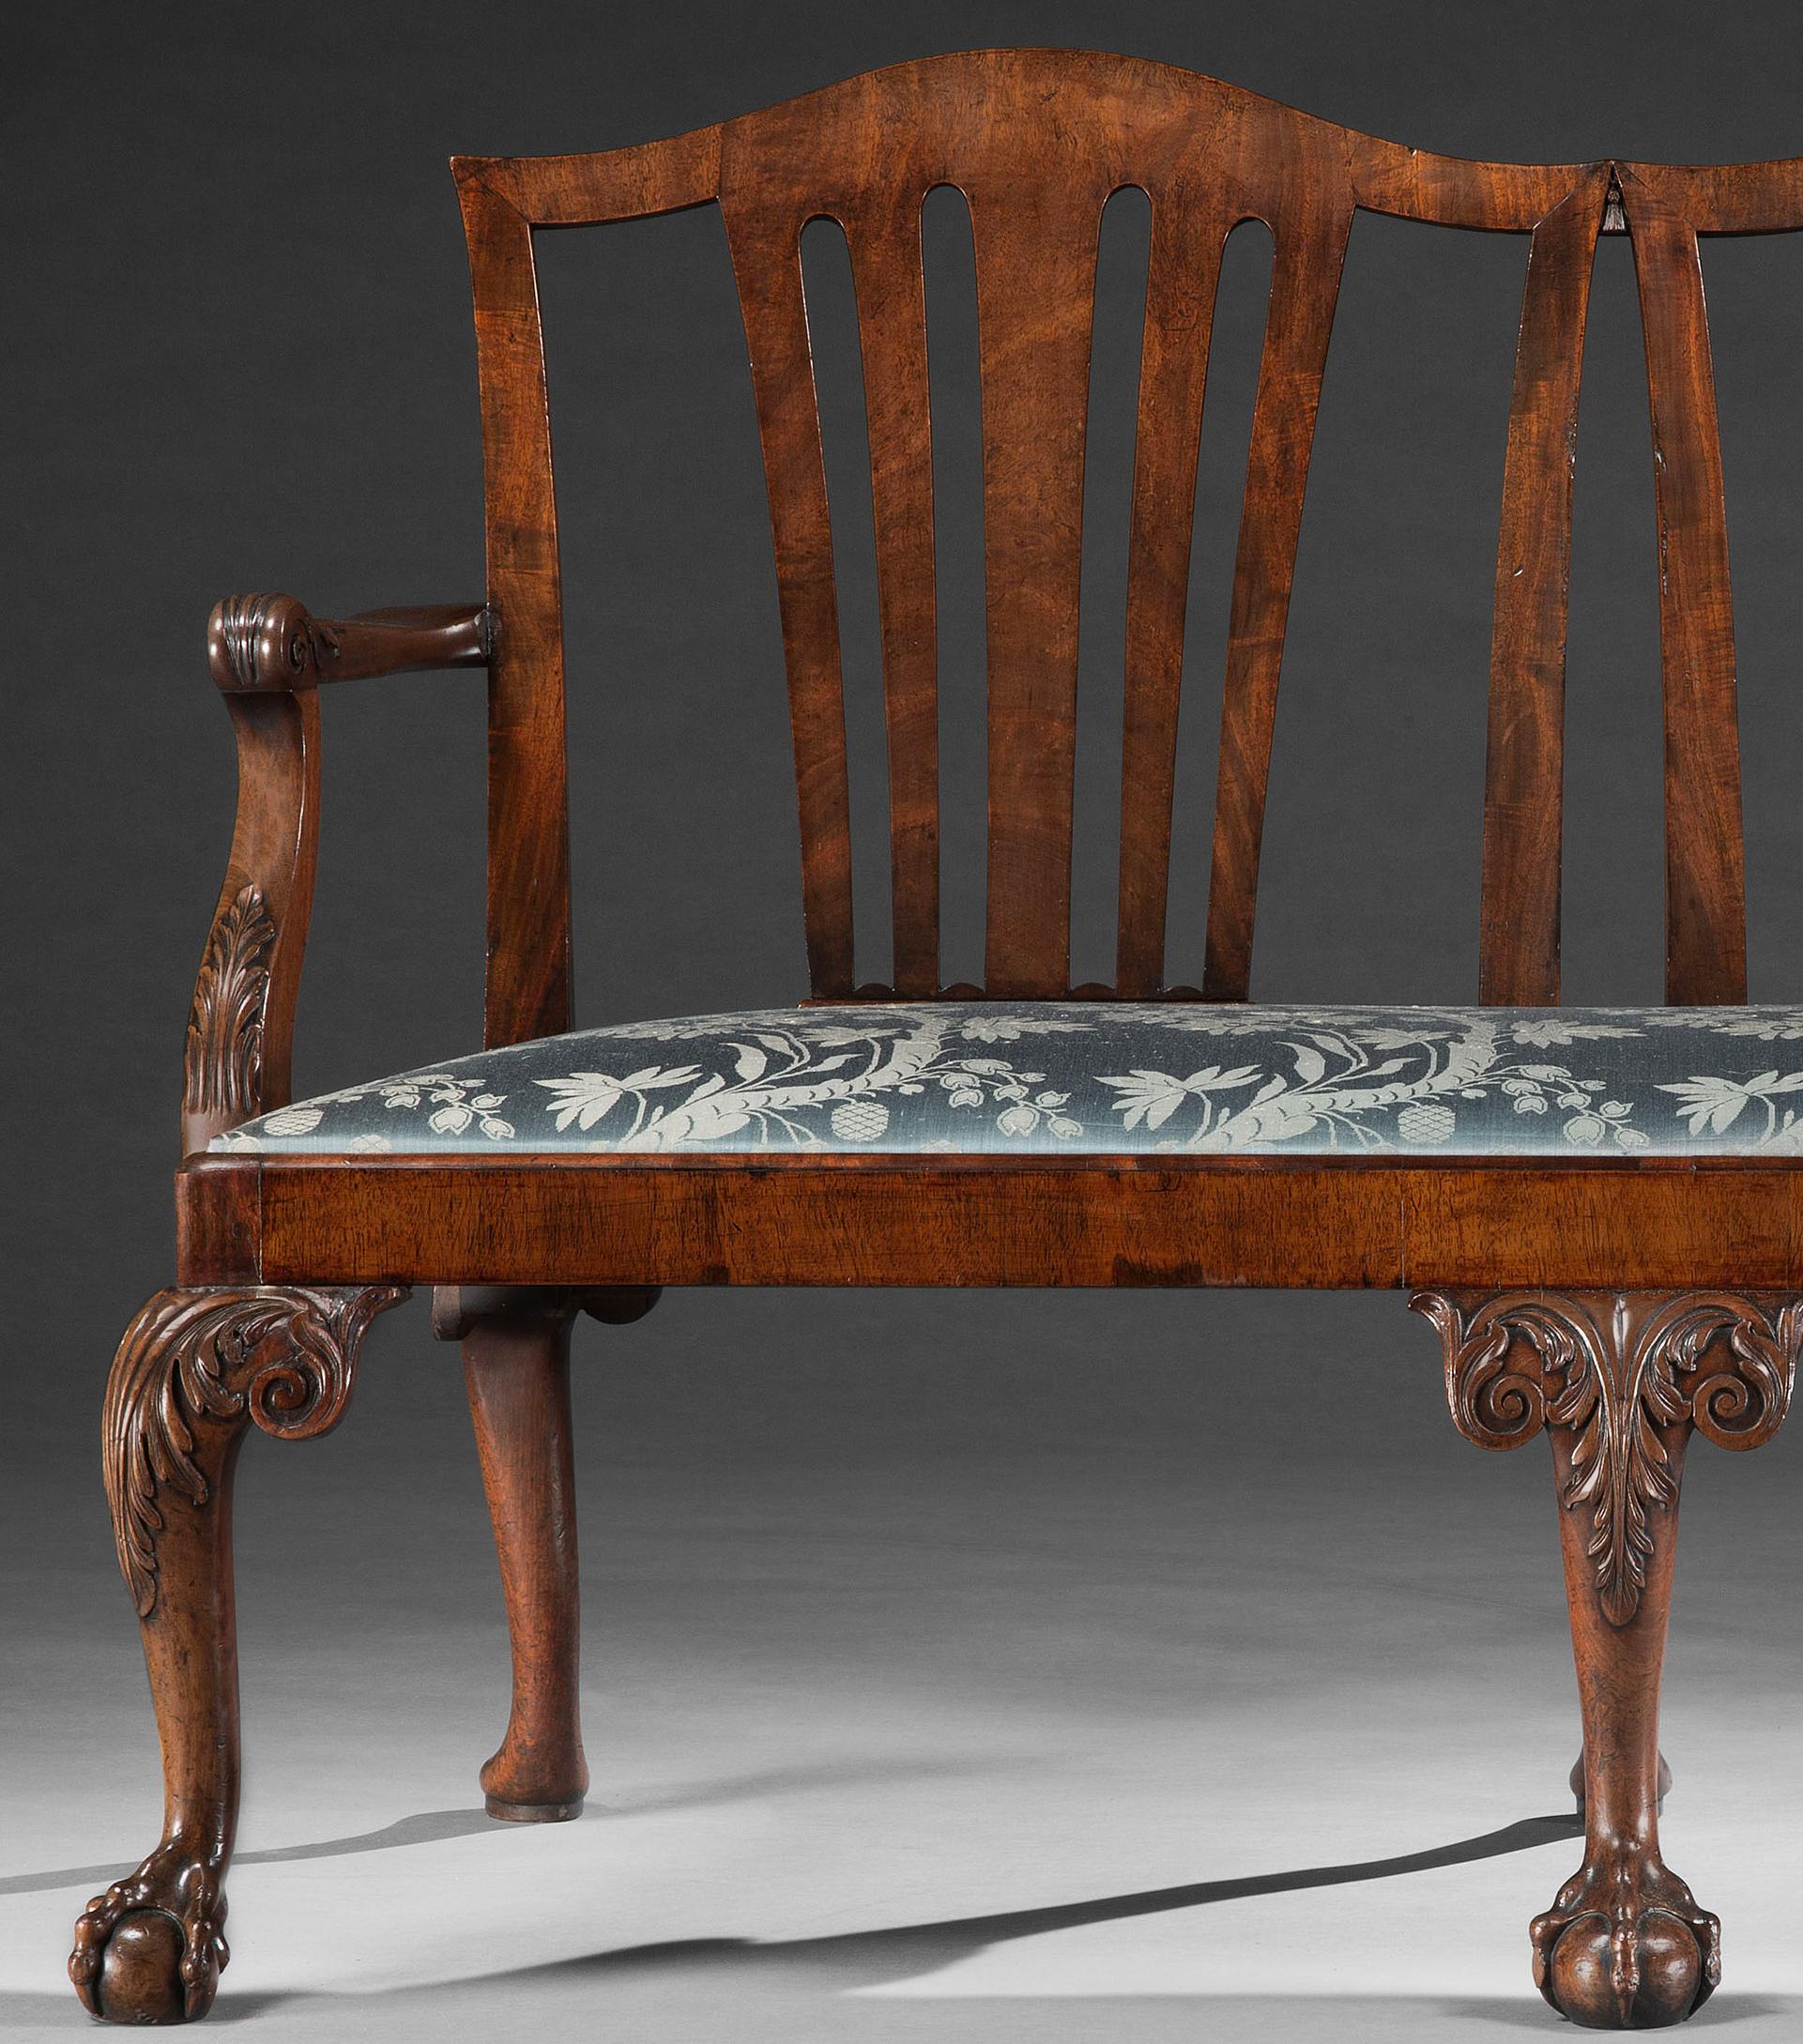 A Fine Pair of George II Mahogany Chair Back Settees
With curved top rails above a tapering vertical splat, joined by carved tassels, the scroll shaped arms with acanthus carving, above rectangular drop in seats, resting on well shaped bold acanthus